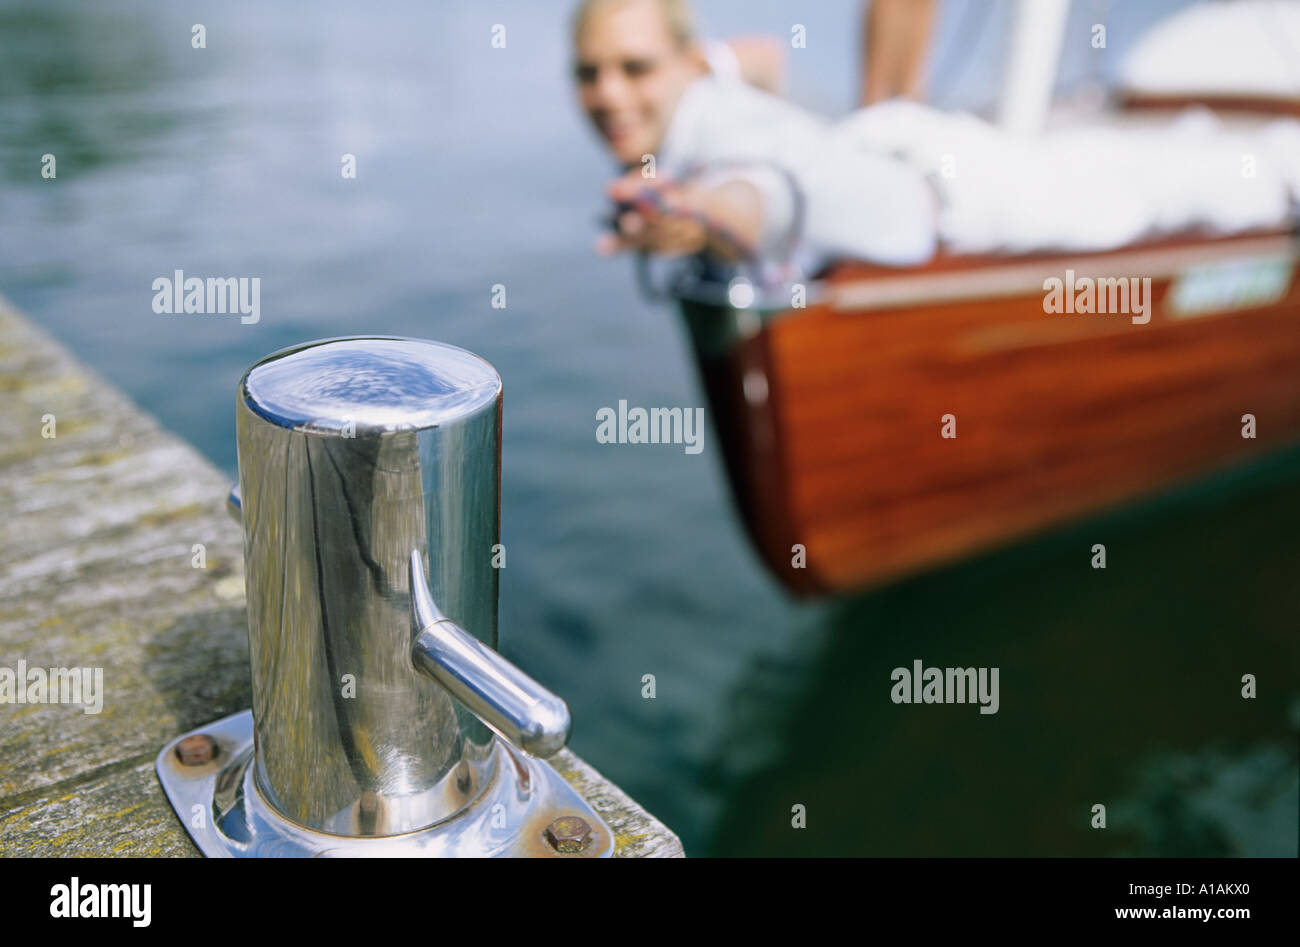 Woman on boat reaching out towards bollard on jetty Stock Photo